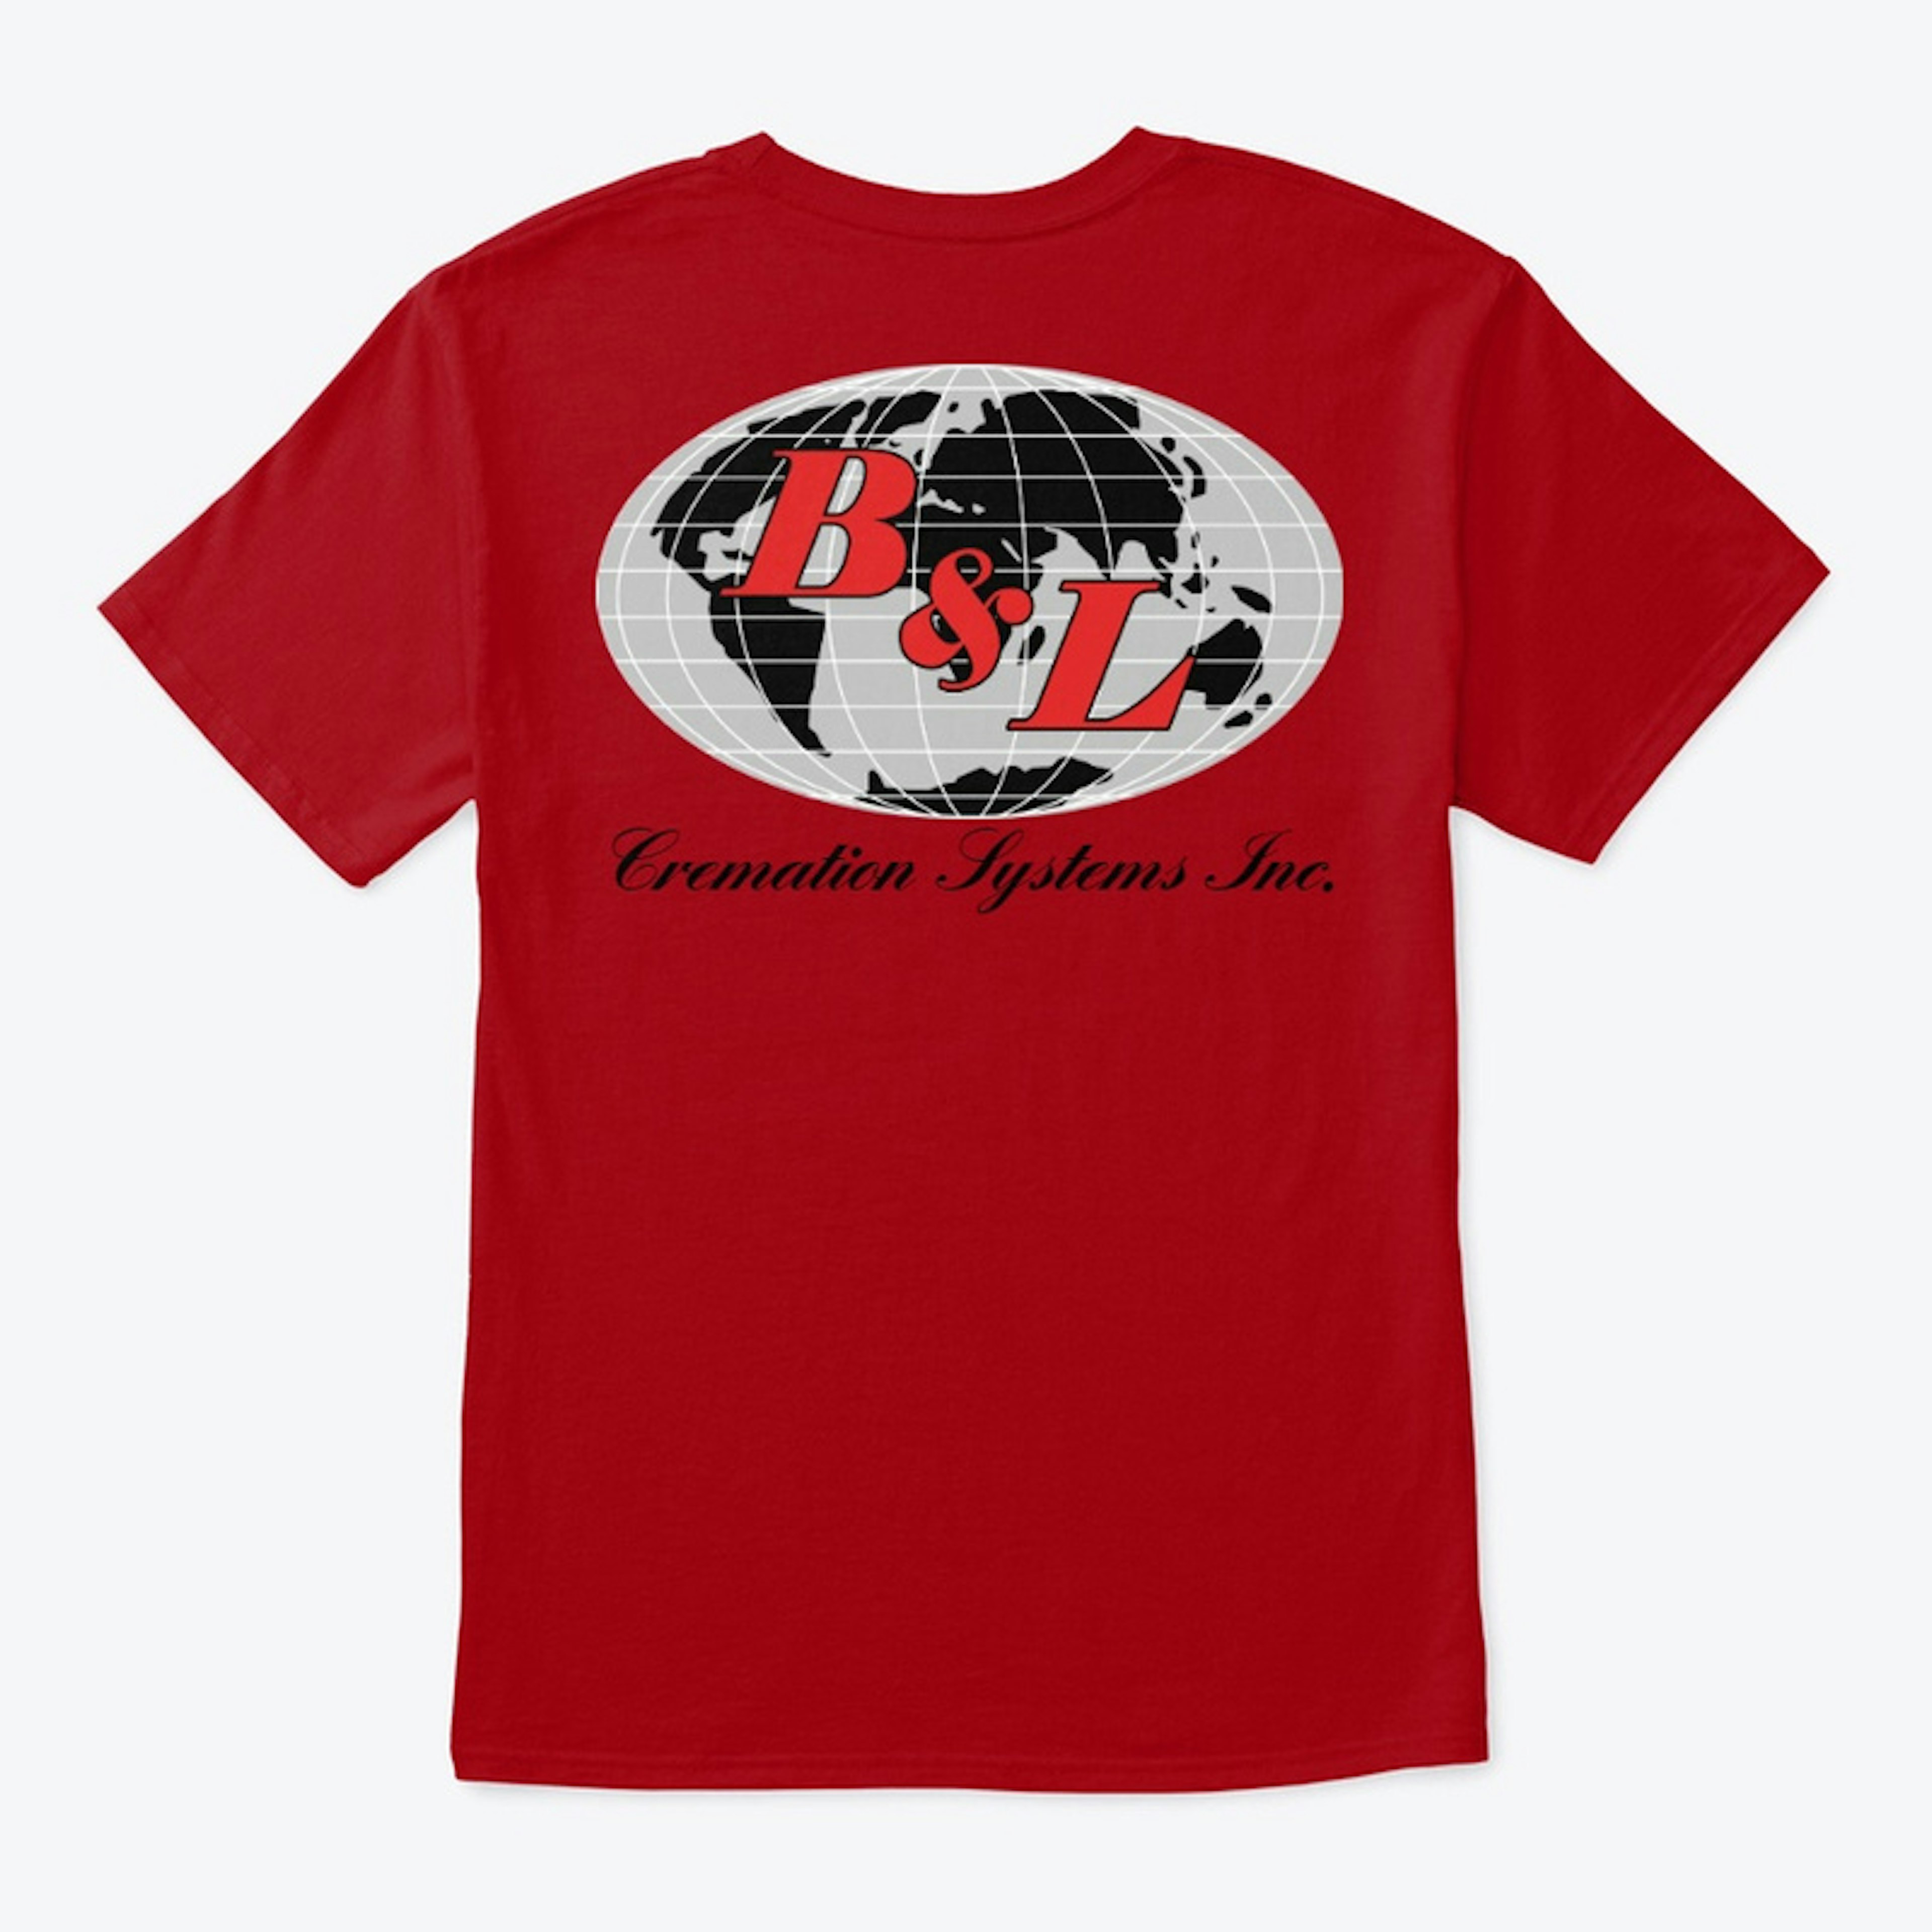 B&L Cremation Systems T-Shirt